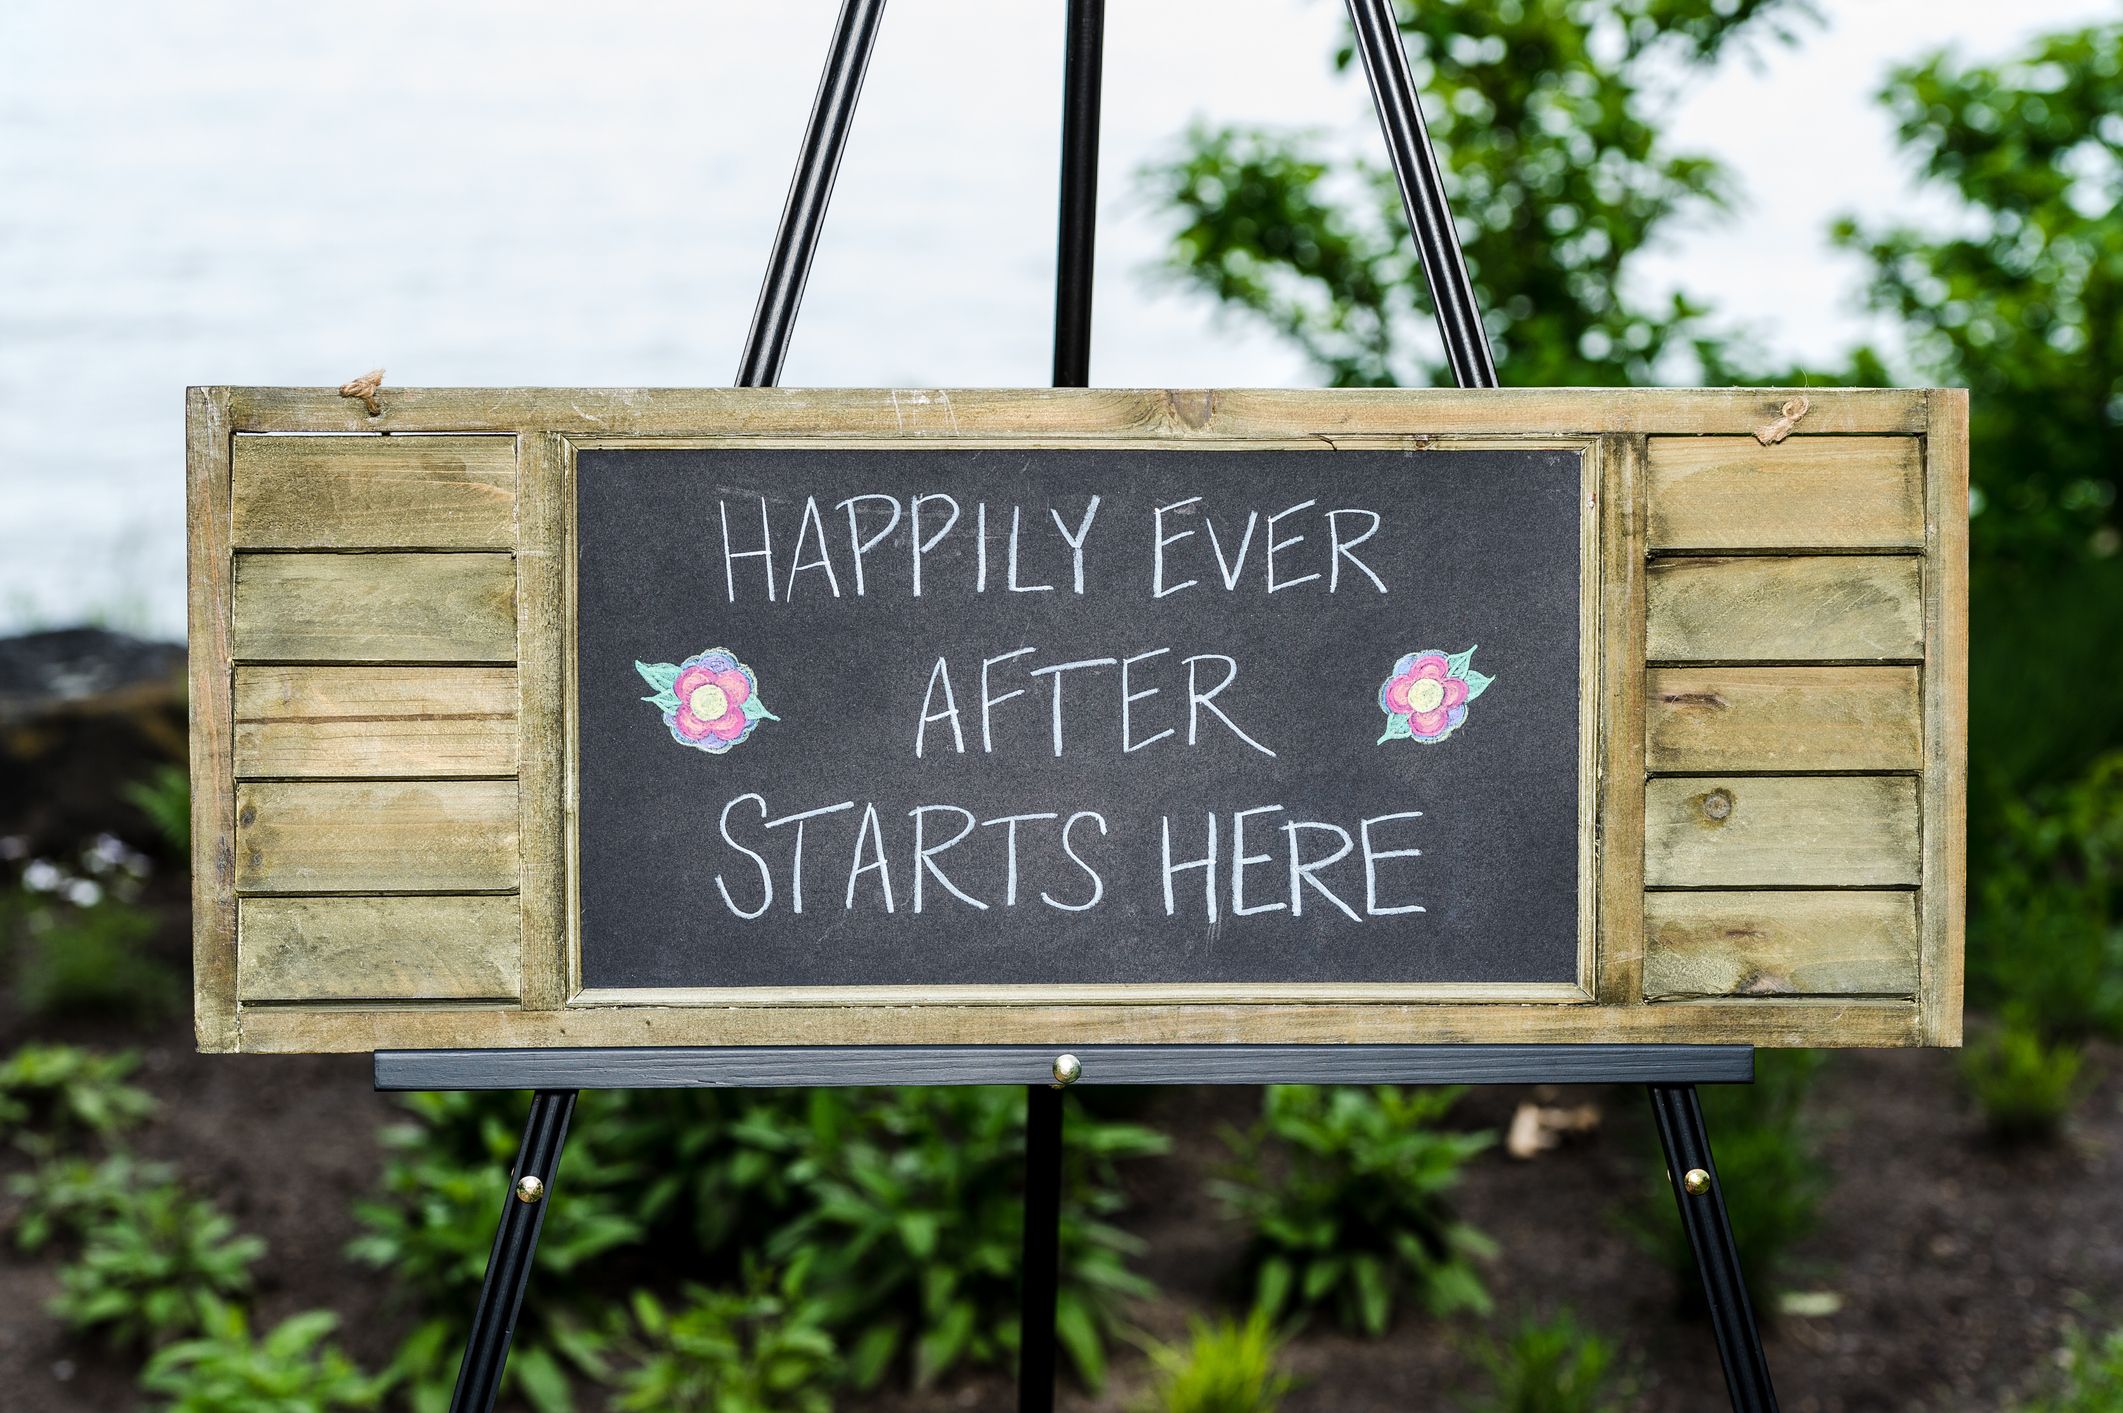 Happily ever after comes from investing in your marriage